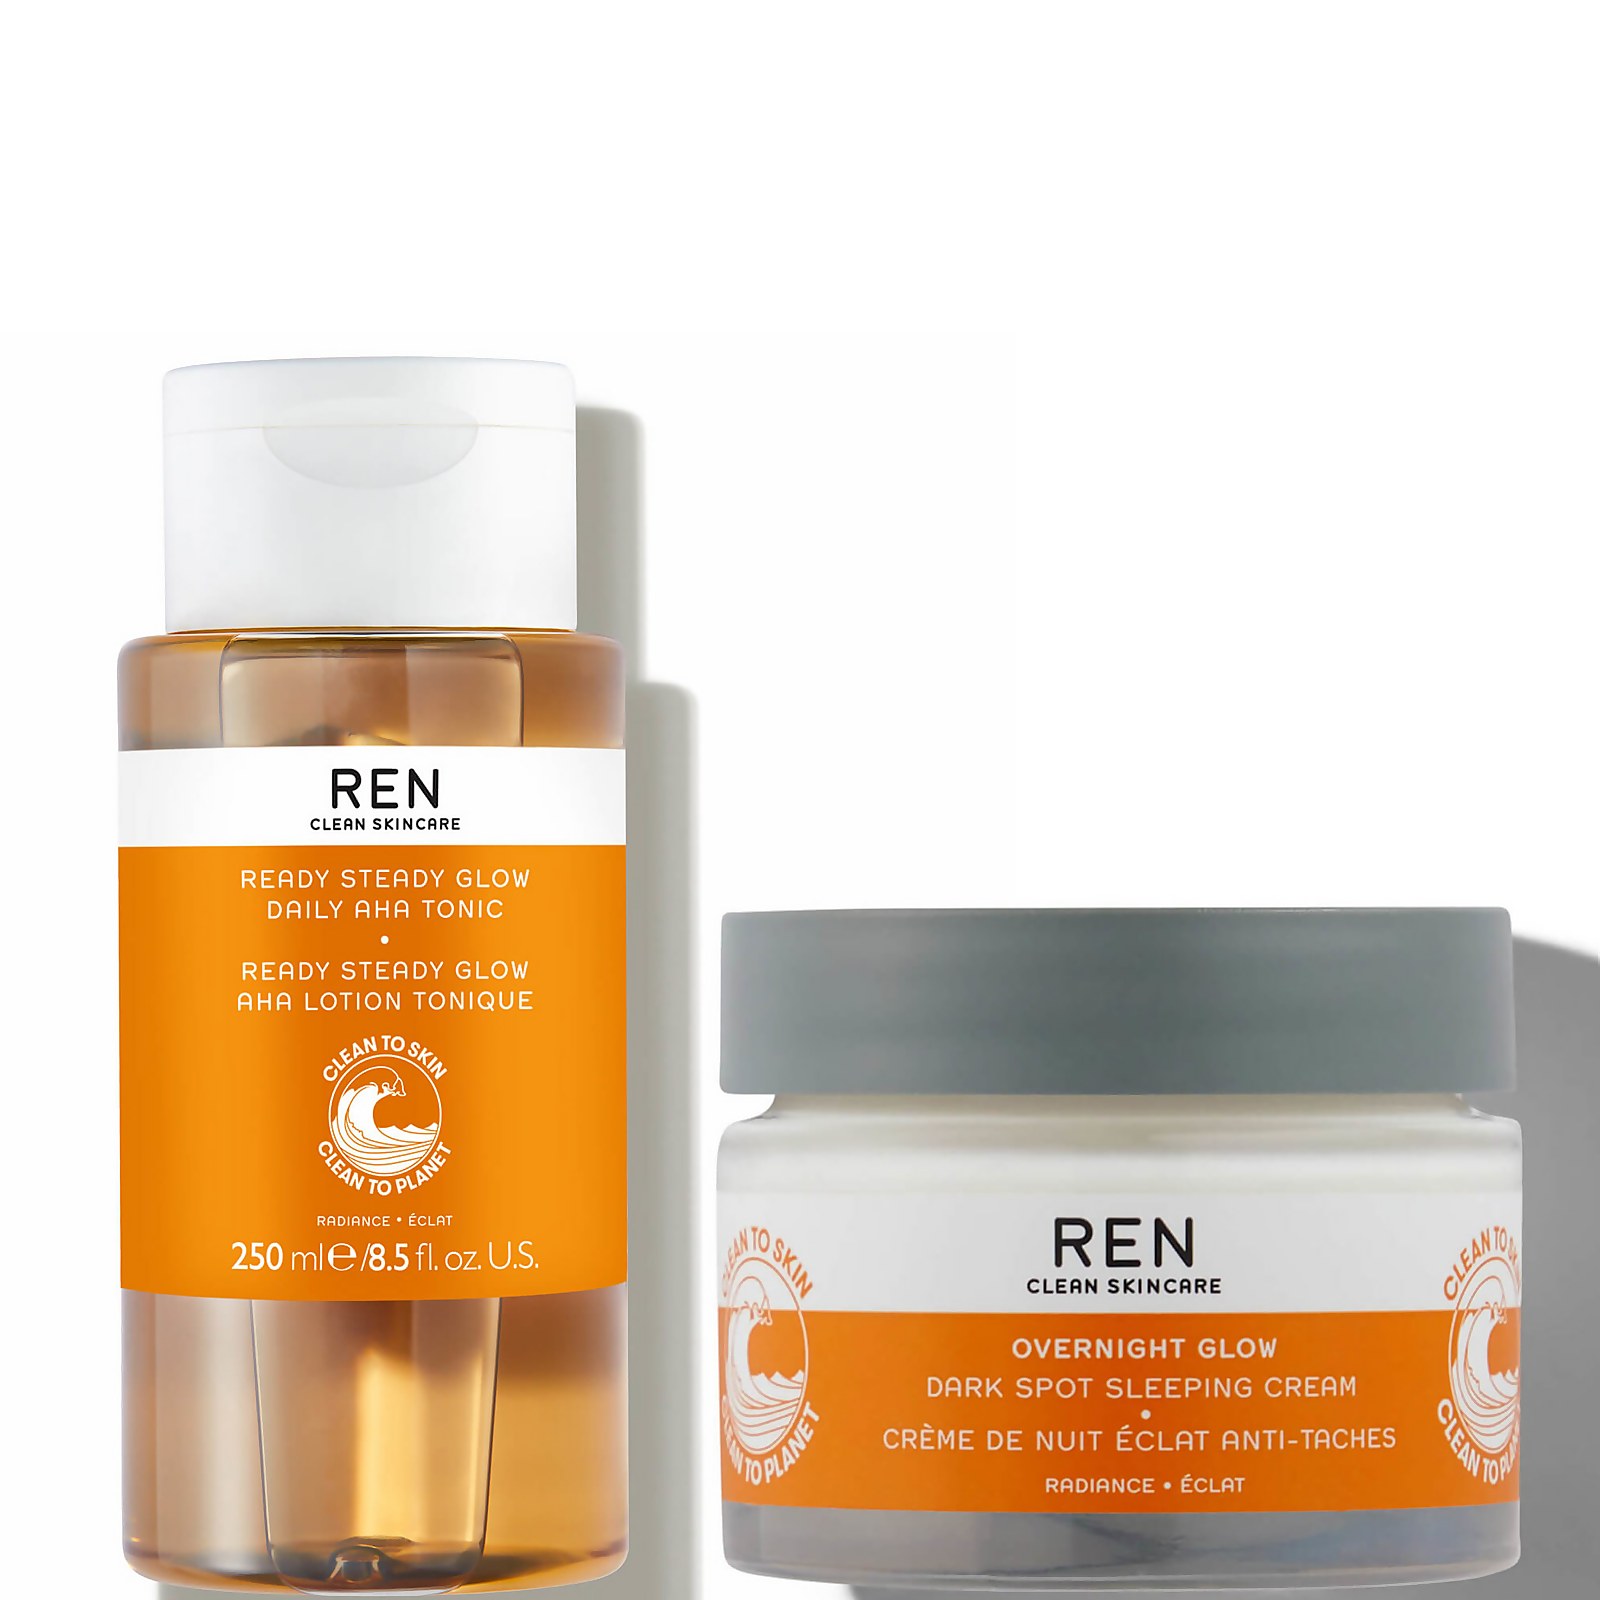 Ren Clean Skincare Glowing And Even Skin Night Time Duo